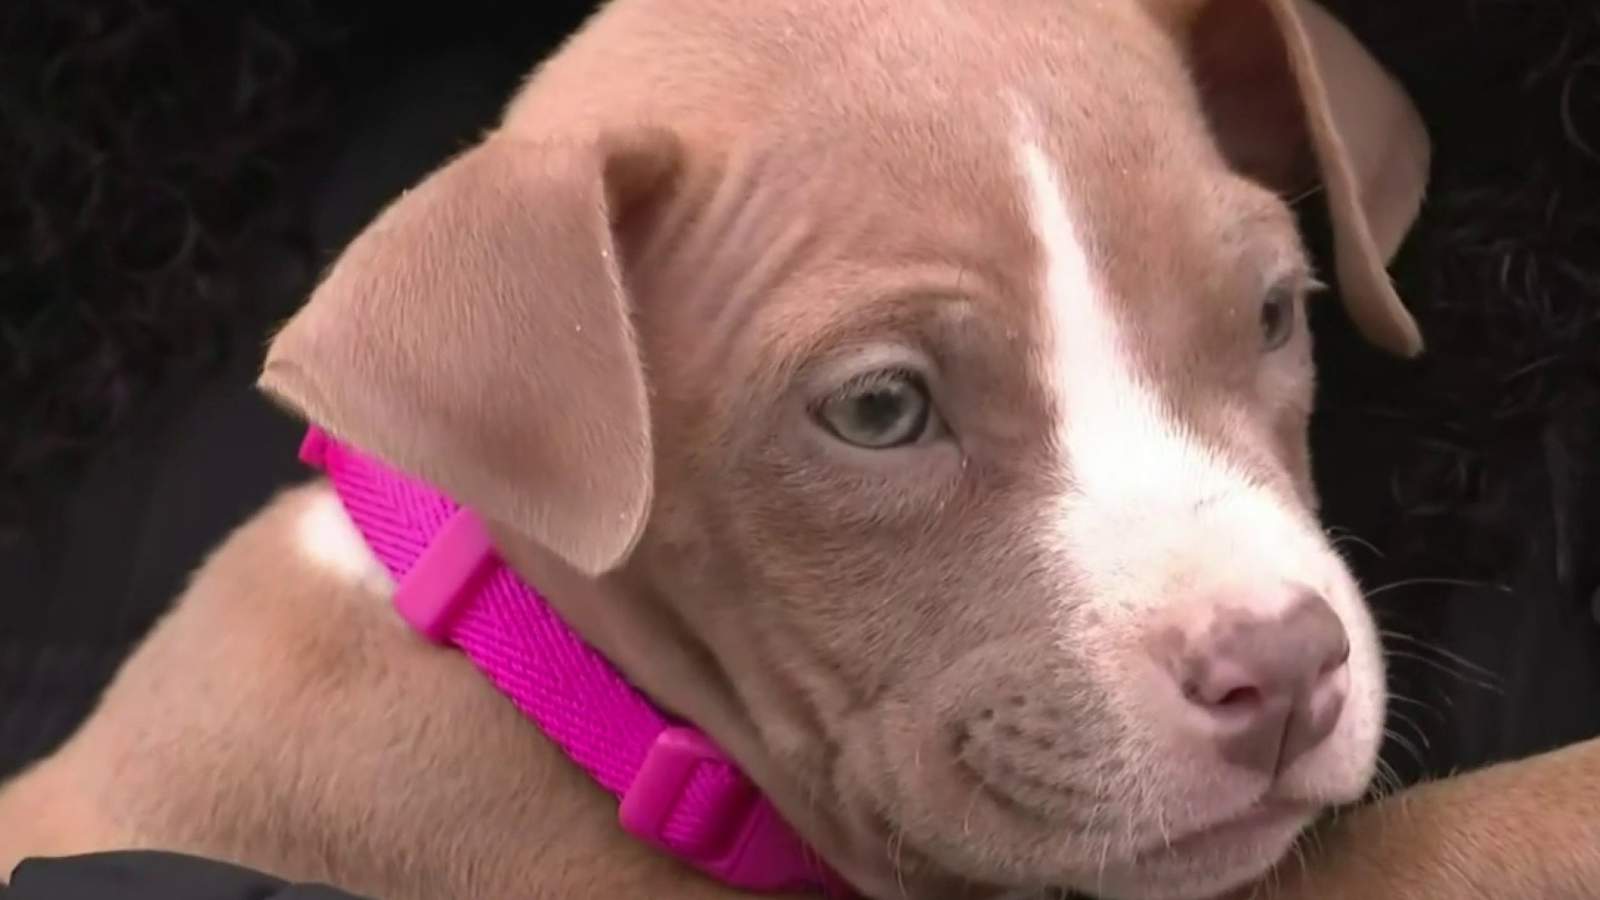 Puppy stolen from family’s home in Warren, returned safely by police